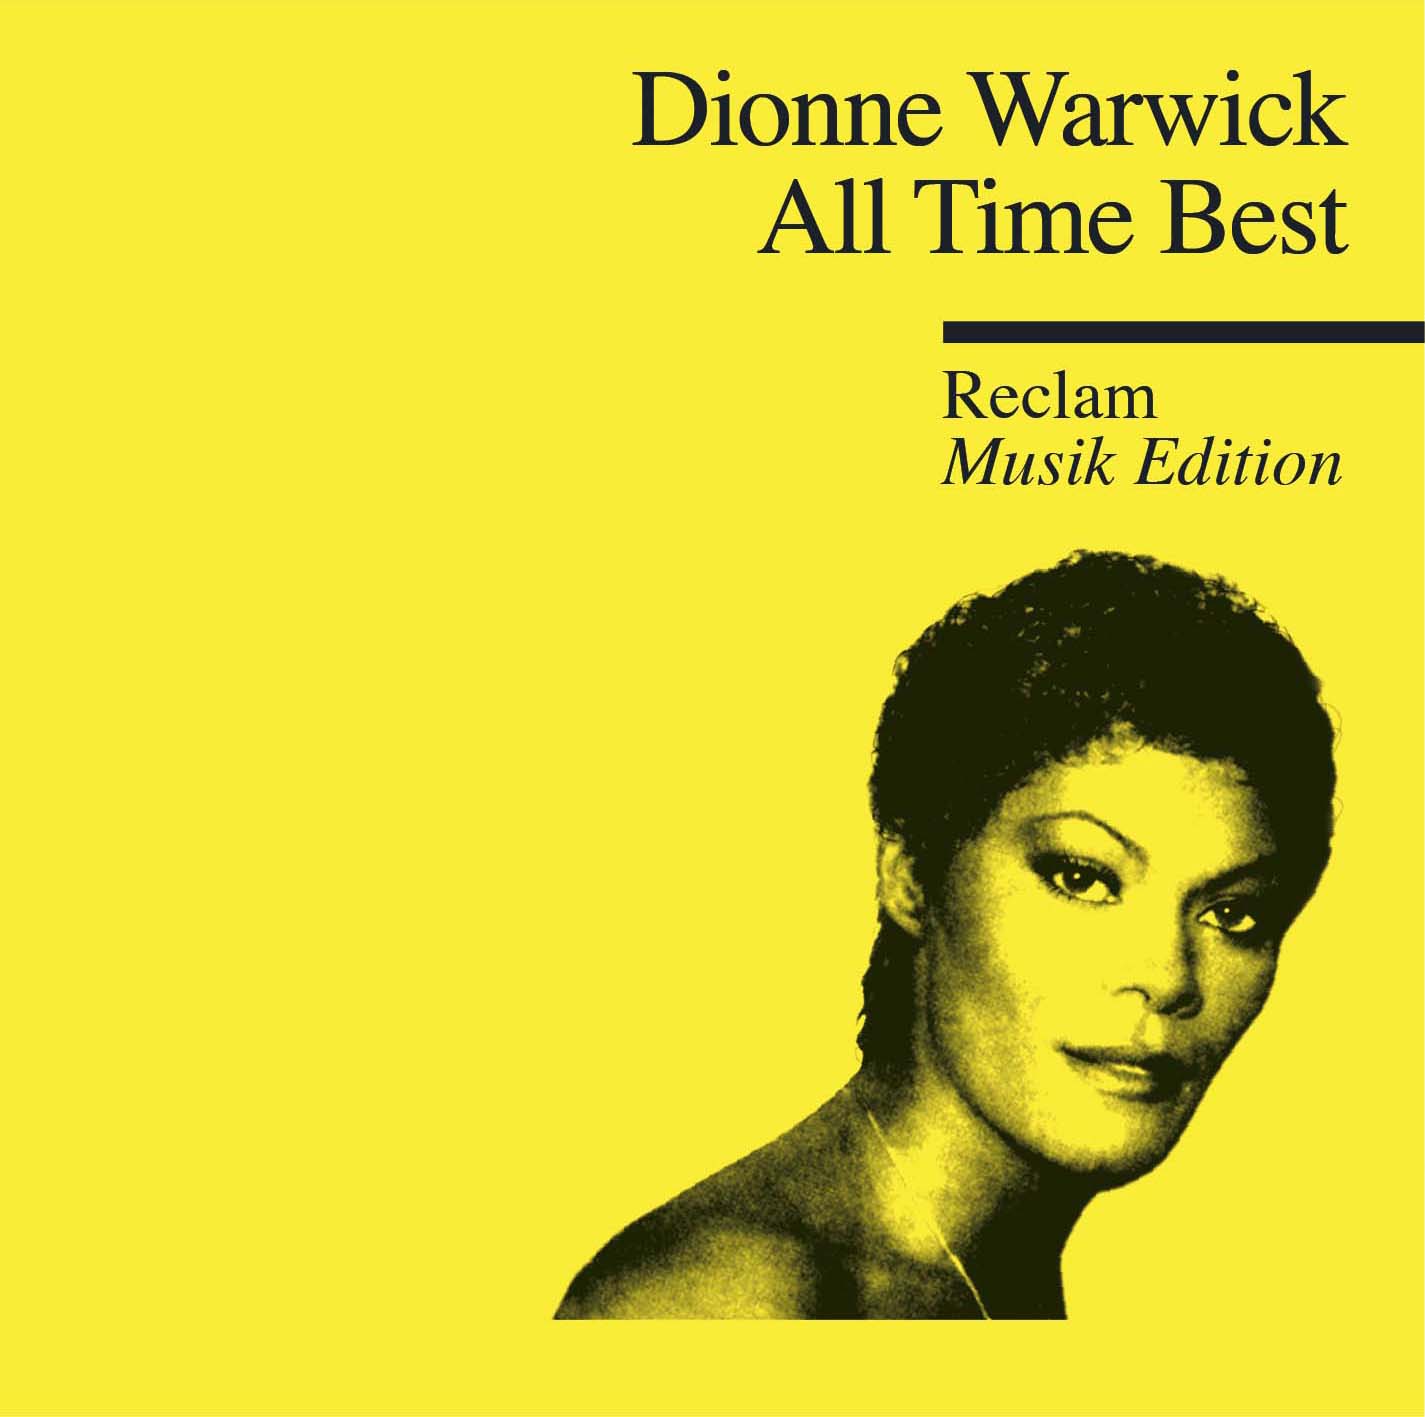 Dionne Warwick – “All Time Best (Reclam Musik Edition)“ (Arista/Sony Music)